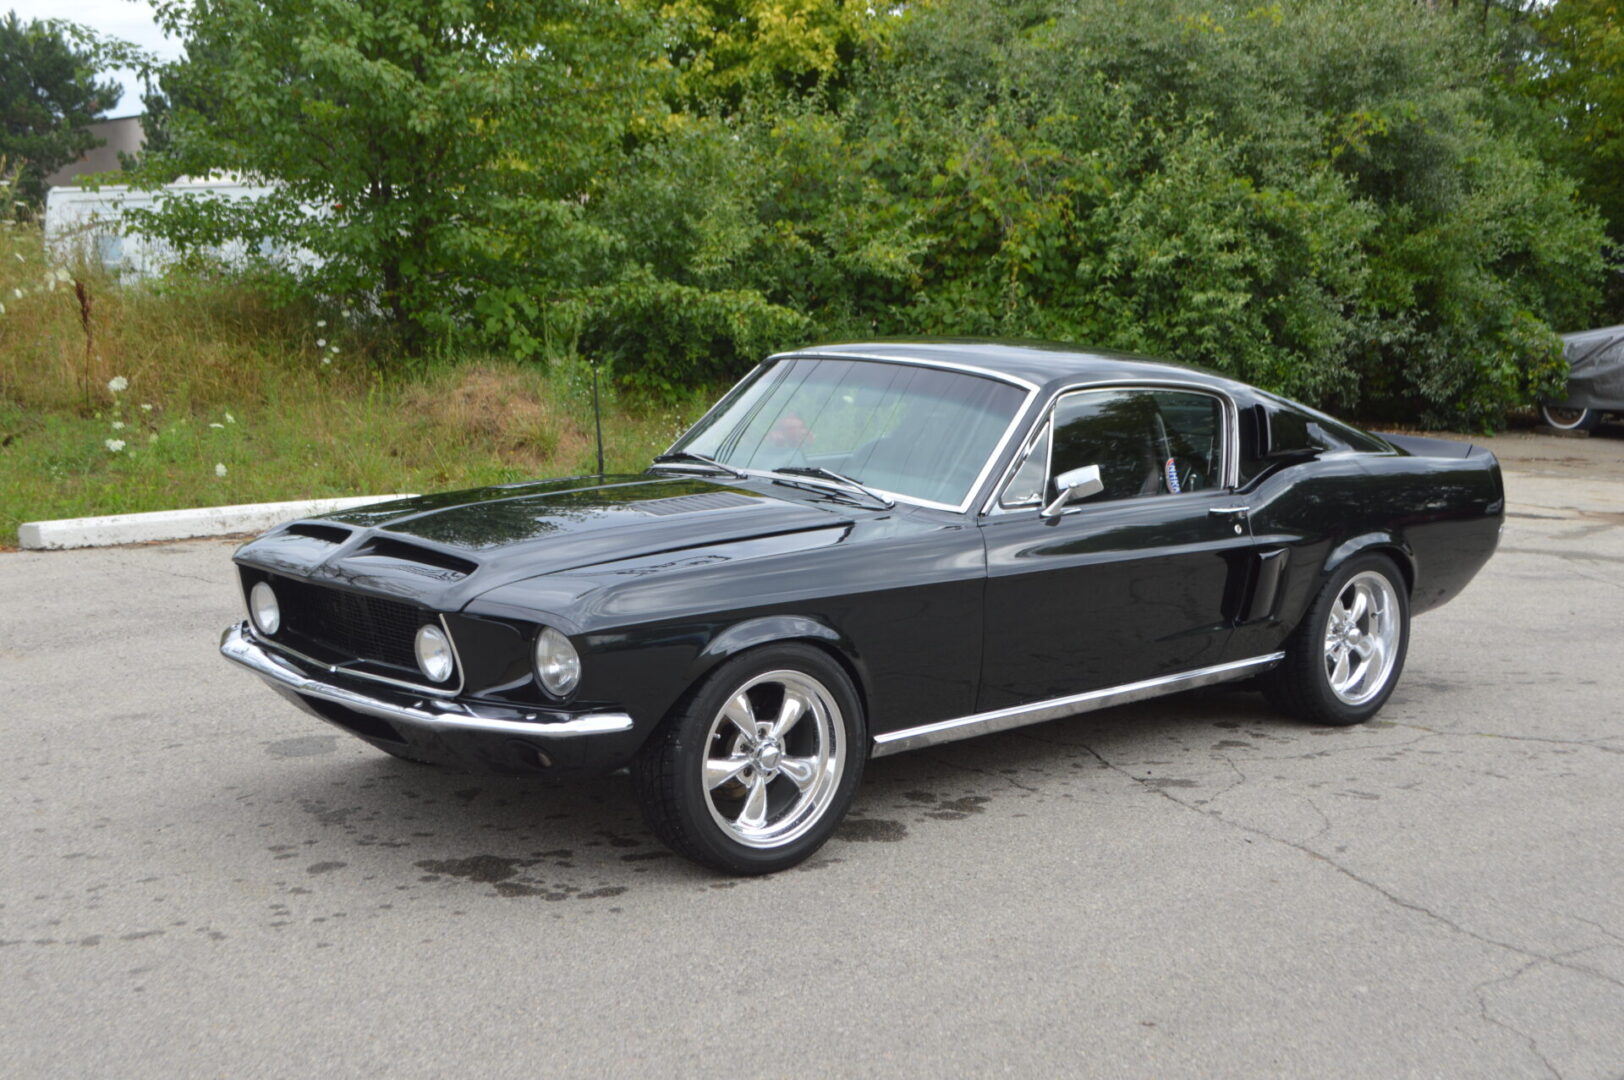 A black 1967 Mustang Fastback